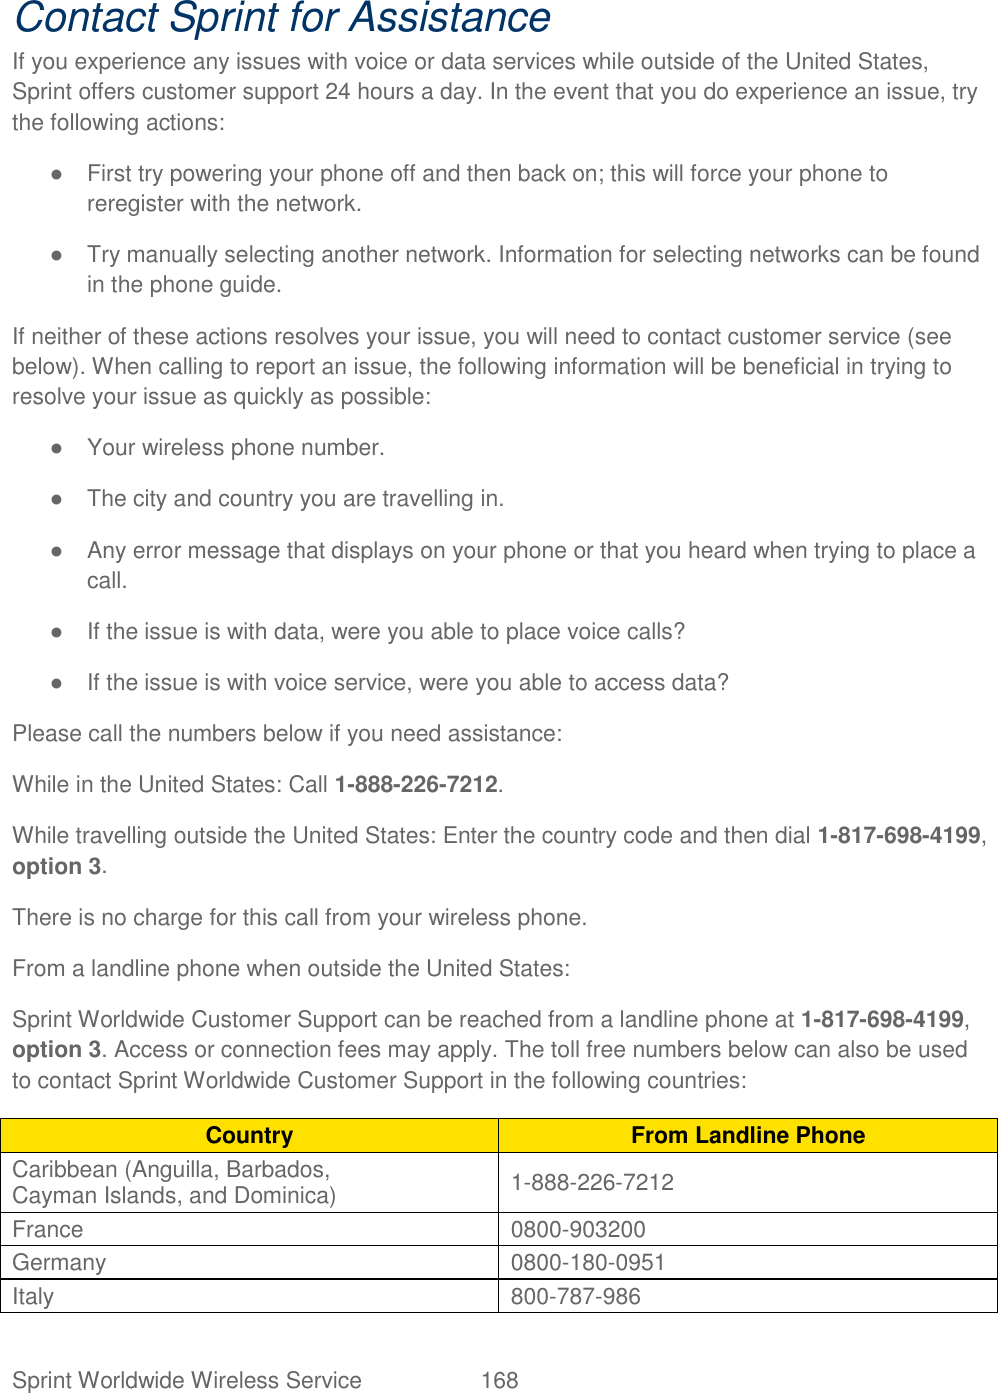  Sprint Worldwide Wireless Service  168   Contact Sprint for Assistance If you experience any issues with voice or data services while outside of the United States, Sprint offers customer support 24 hours a day. In the event that you do experience an issue, try the following actions: ●  First try powering your phone off and then back on; this will force your phone to reregister with the network. ●  Try manually selecting another network. Information for selecting networks can be found in the phone guide. If neither of these actions resolves your issue, you will need to contact customer service (see below). When calling to report an issue, the following information will be beneficial in trying to resolve your issue as quickly as possible:  ●  Your wireless phone number. ●  The city and country you are travelling in. ●  Any error message that displays on your phone or that you heard when trying to place a call.  ●  If the issue is with data, were you able to place voice calls? ●  If the issue is with voice service, were you able to access data? Please call the numbers below if you need assistance:  While in the United States: Call 1-888-226-7212. While travelling outside the United States: Enter the country code and then dial 1-817-698-4199, option 3. There is no charge for this call from your wireless phone. From a landline phone when outside the United States: Sprint Worldwide Customer Support can be reached from a landline phone at 1-817-698-4199, option 3. Access or connection fees may apply. The toll free numbers below can also be used to contact Sprint Worldwide Customer Support in the following countries: Country From Landline Phone Caribbean (Anguilla, Barbados,  Cayman Islands, and Dominica)  1-888-226-7212  France  0800-903200  Germany  0800-180-0951  Italy  800-787-986  